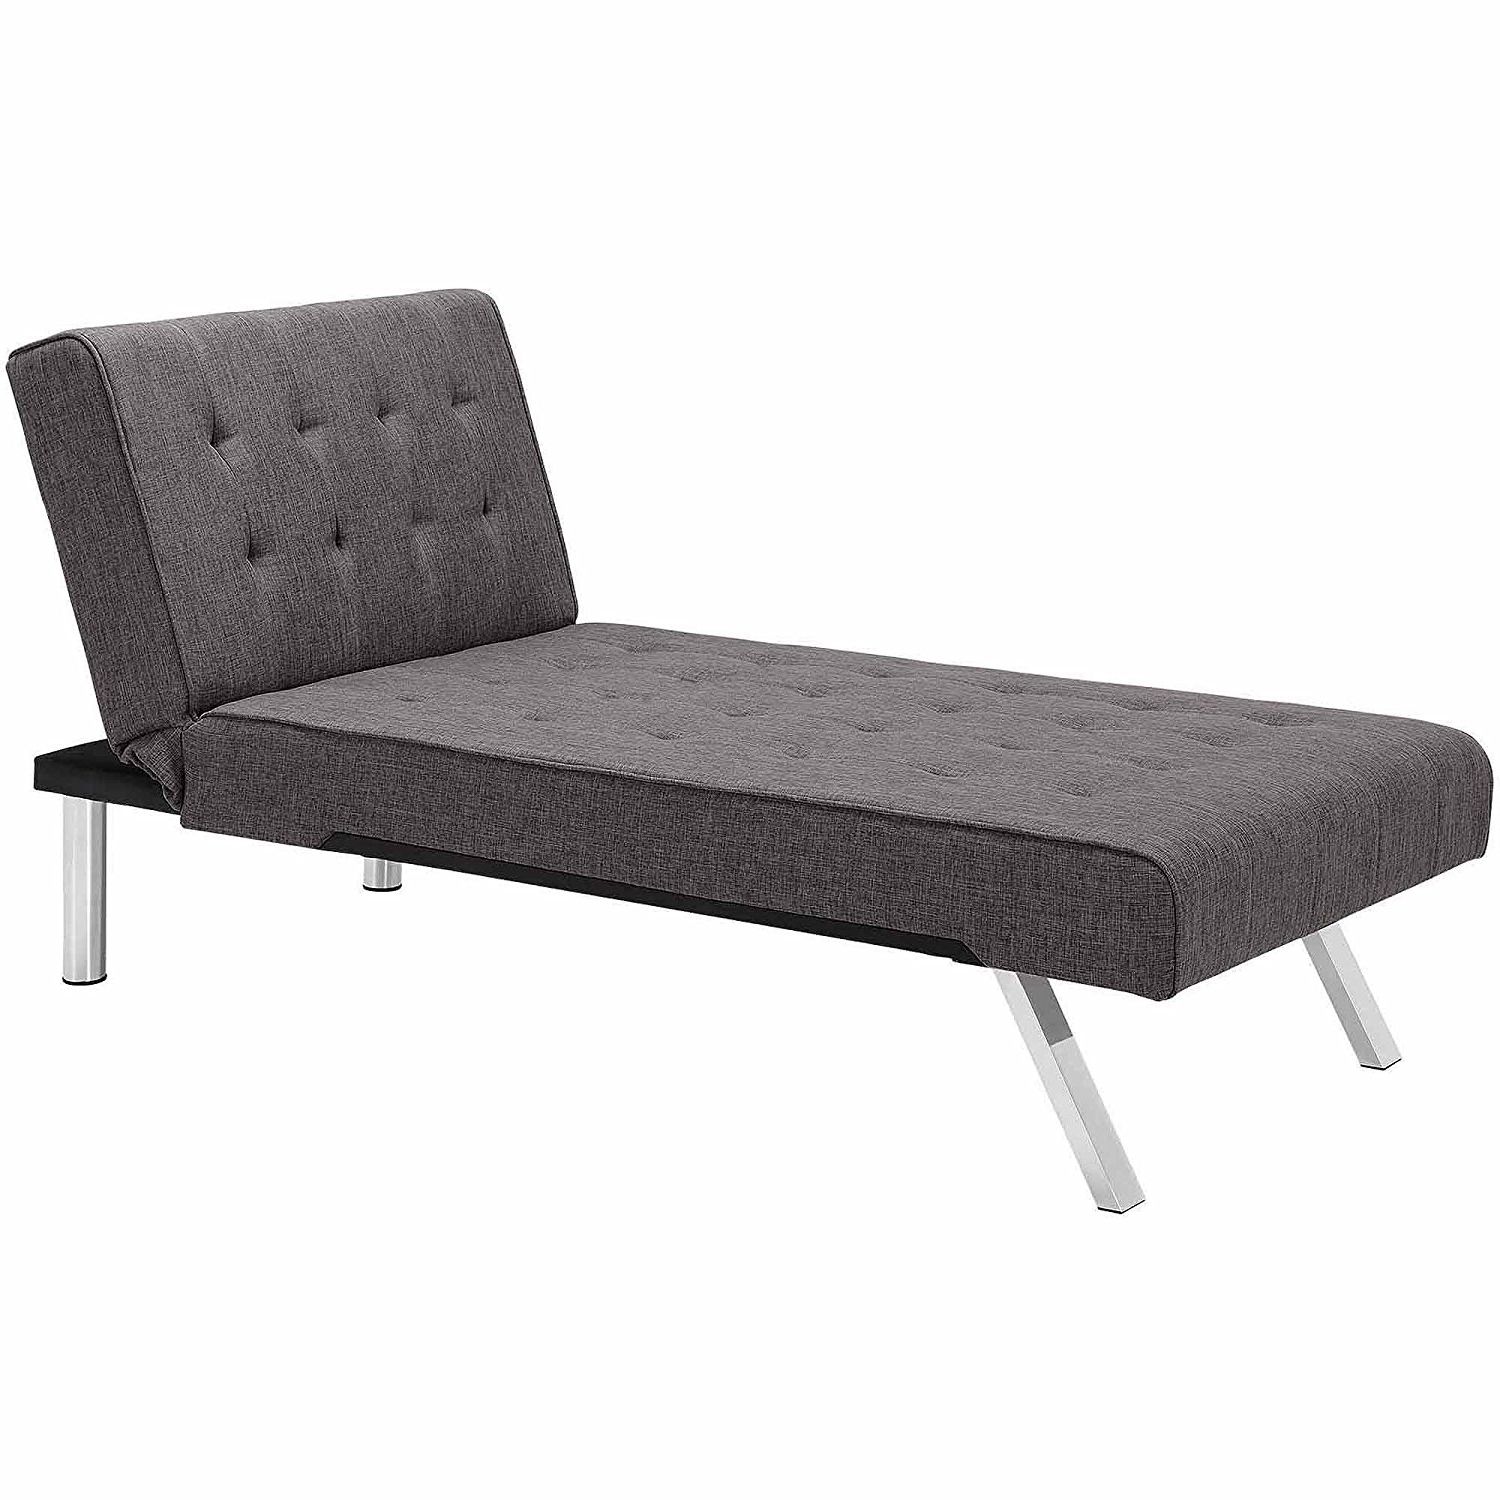 Recent Futon Chaises For Amazon: Emily Futon Chaise Lounger (Gray): Kitchen & Dining (View 6 of 15)